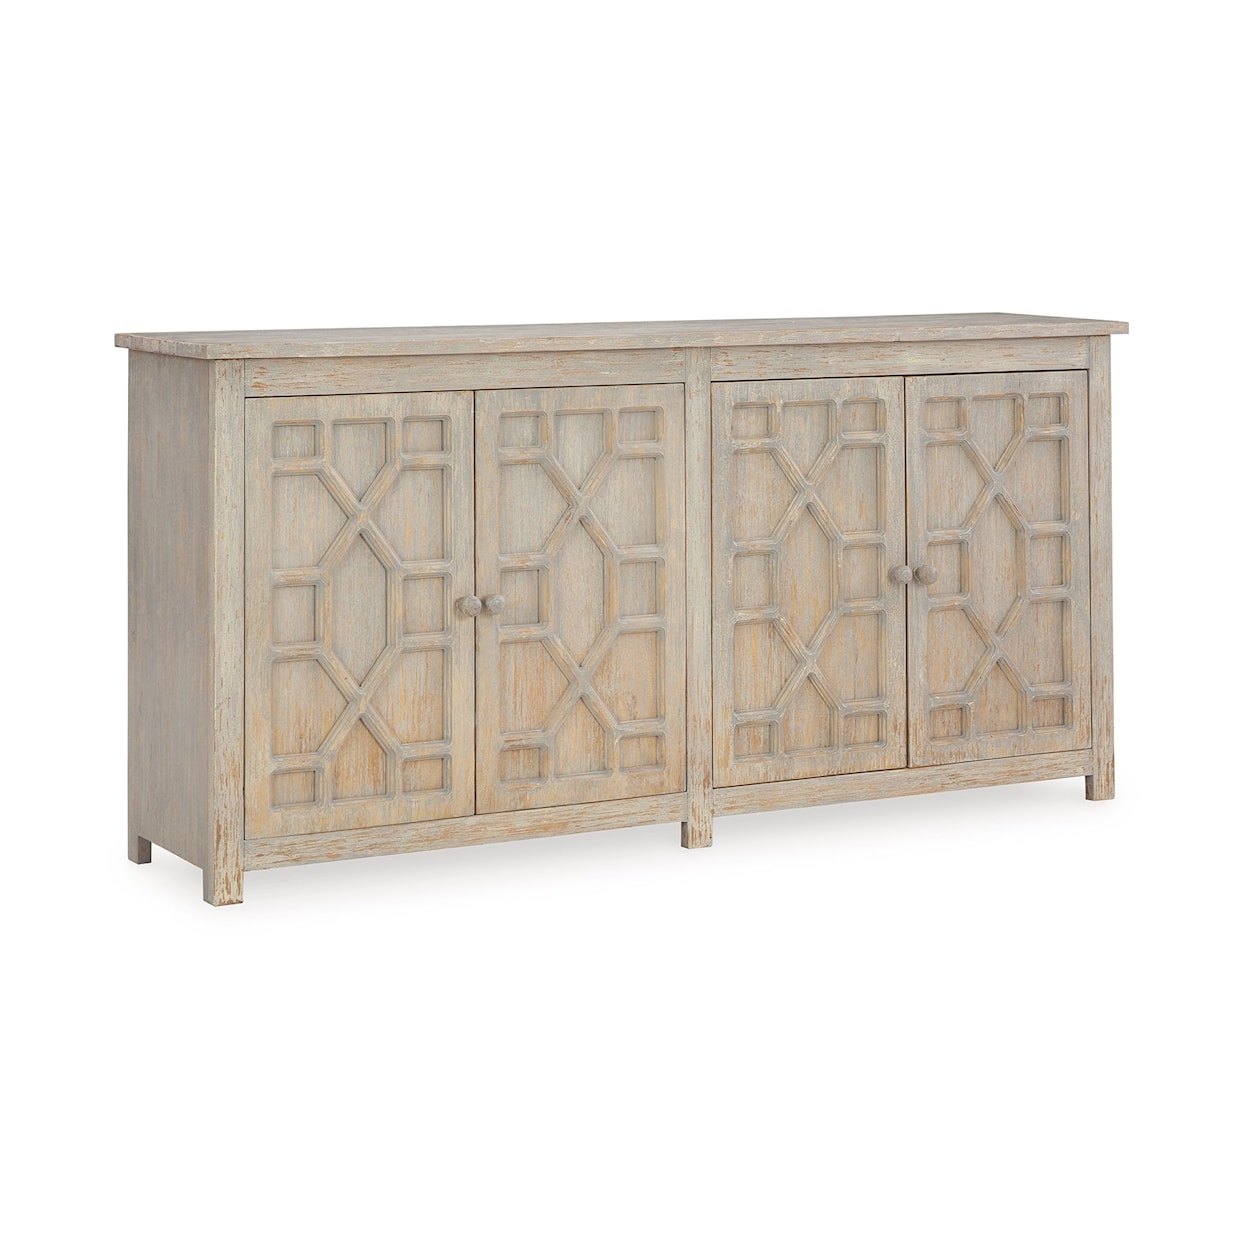 Signature Design by Ashley Furniture Caitrich Accent Cabinet